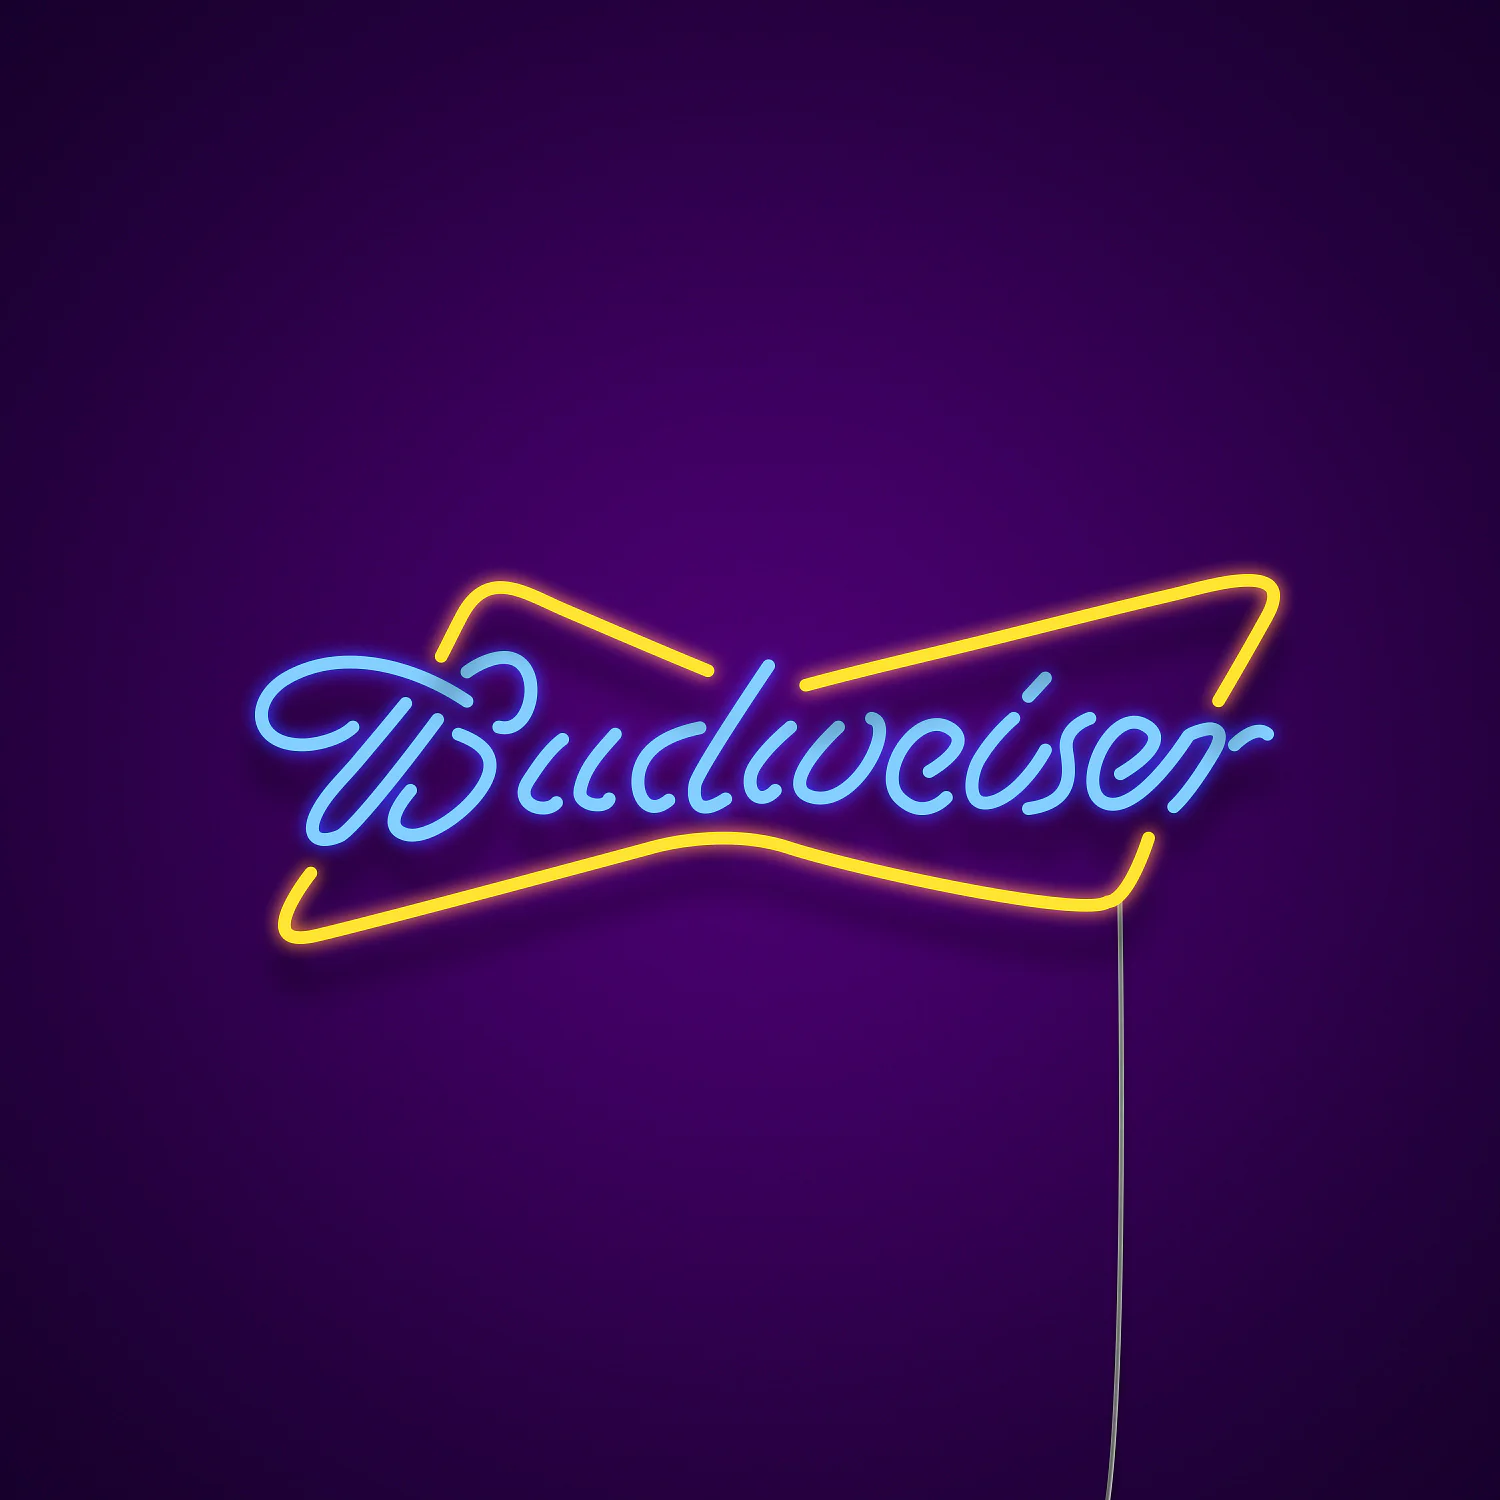 Budweiser-neon-sign-cover